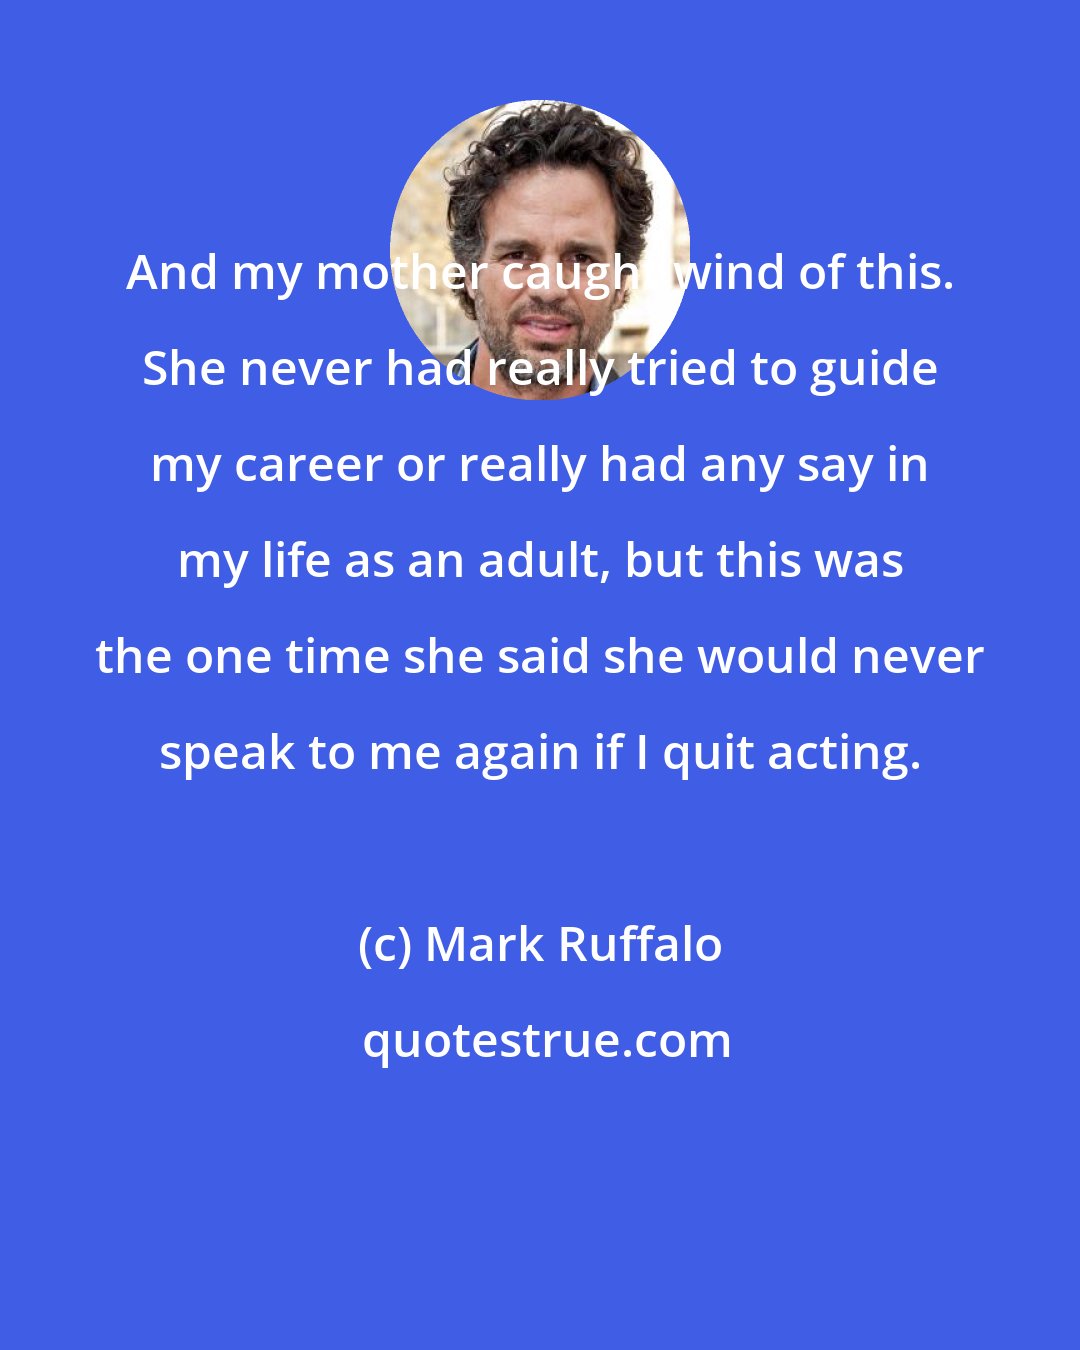 Mark Ruffalo: And my mother caught wind of this. She never had really tried to guide my career or really had any say in my life as an adult, but this was the one time she said she would never speak to me again if I quit acting.